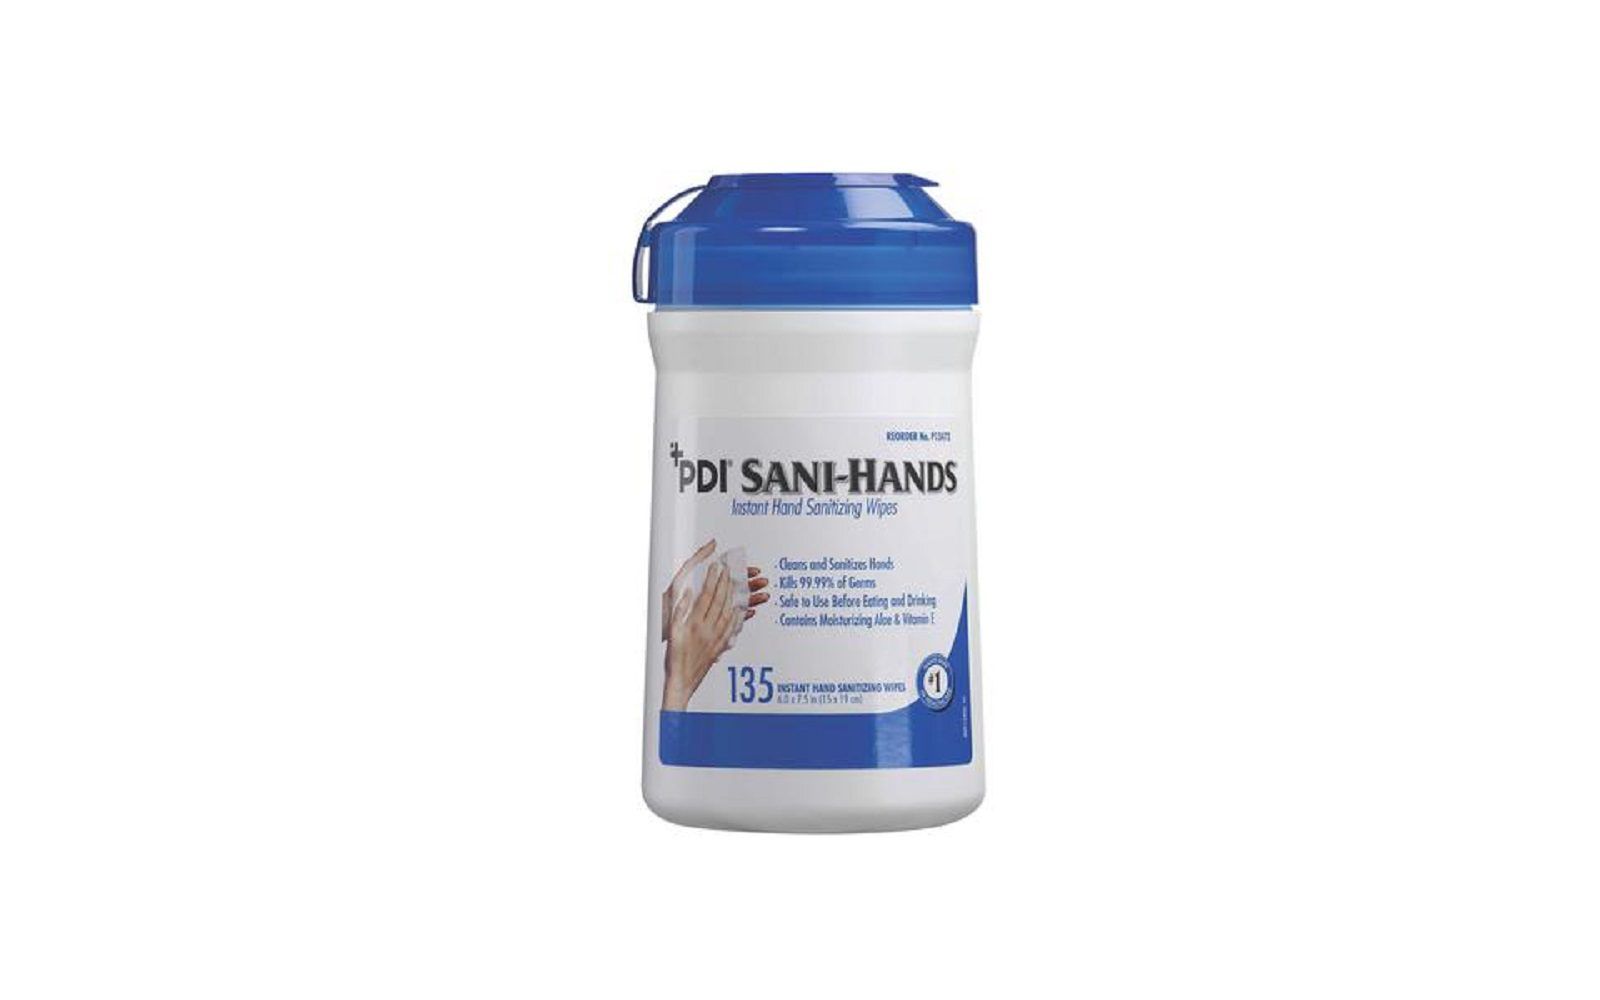 Sani-hands instant hand sanitizing wipes, canister with 135 wipes, 6" x 7. 5"